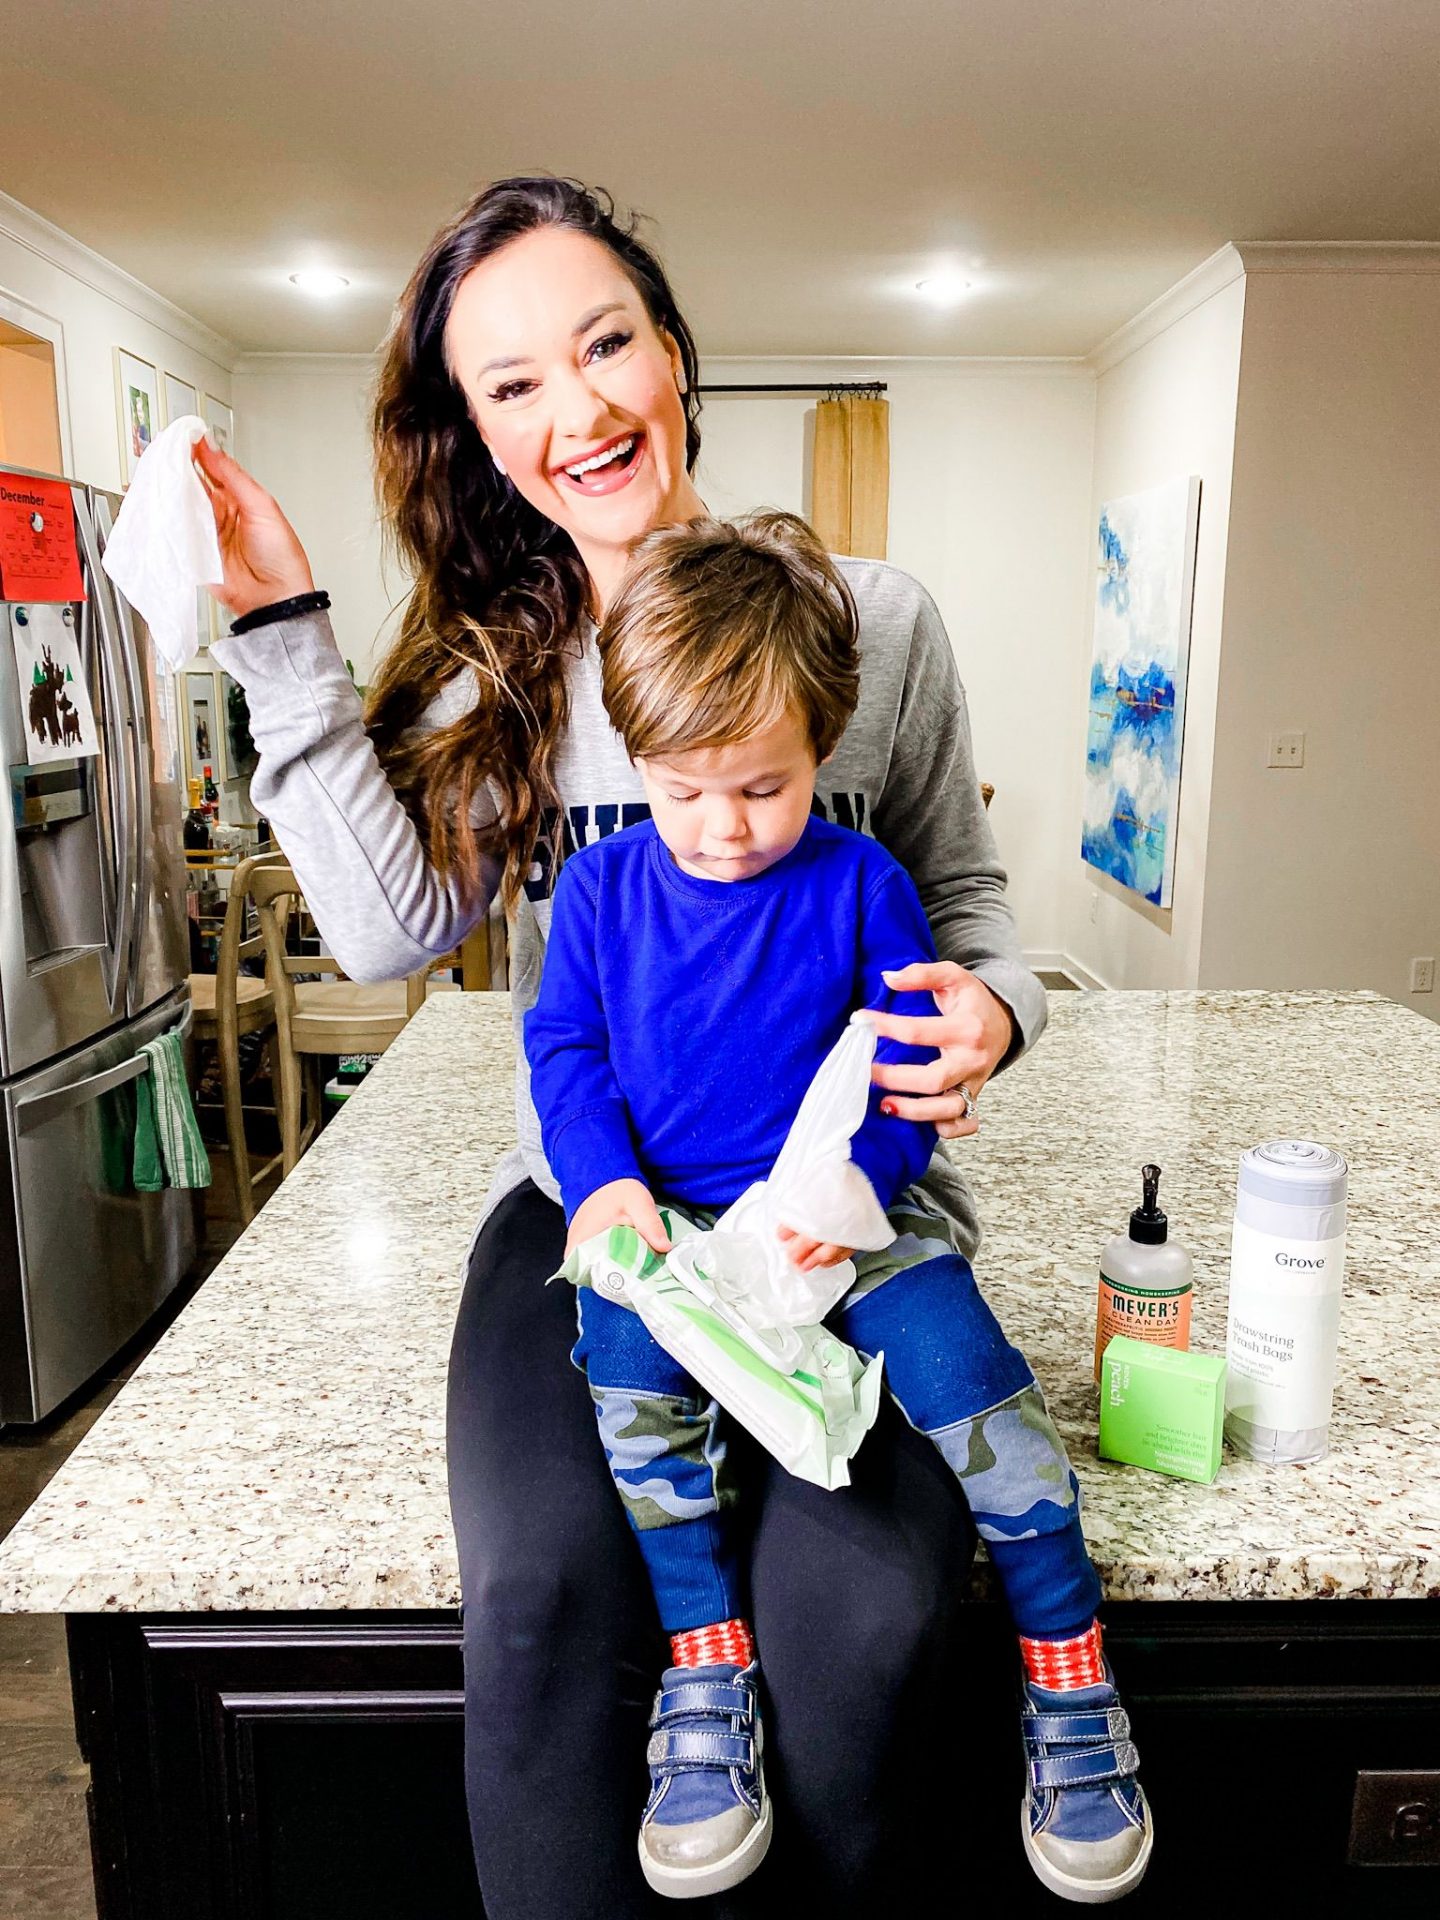 How To Keep Your Home Clean And Organized In 2021, by Alabama Health + Lifestyle blogger, Heather Brown // My Life Well Loved